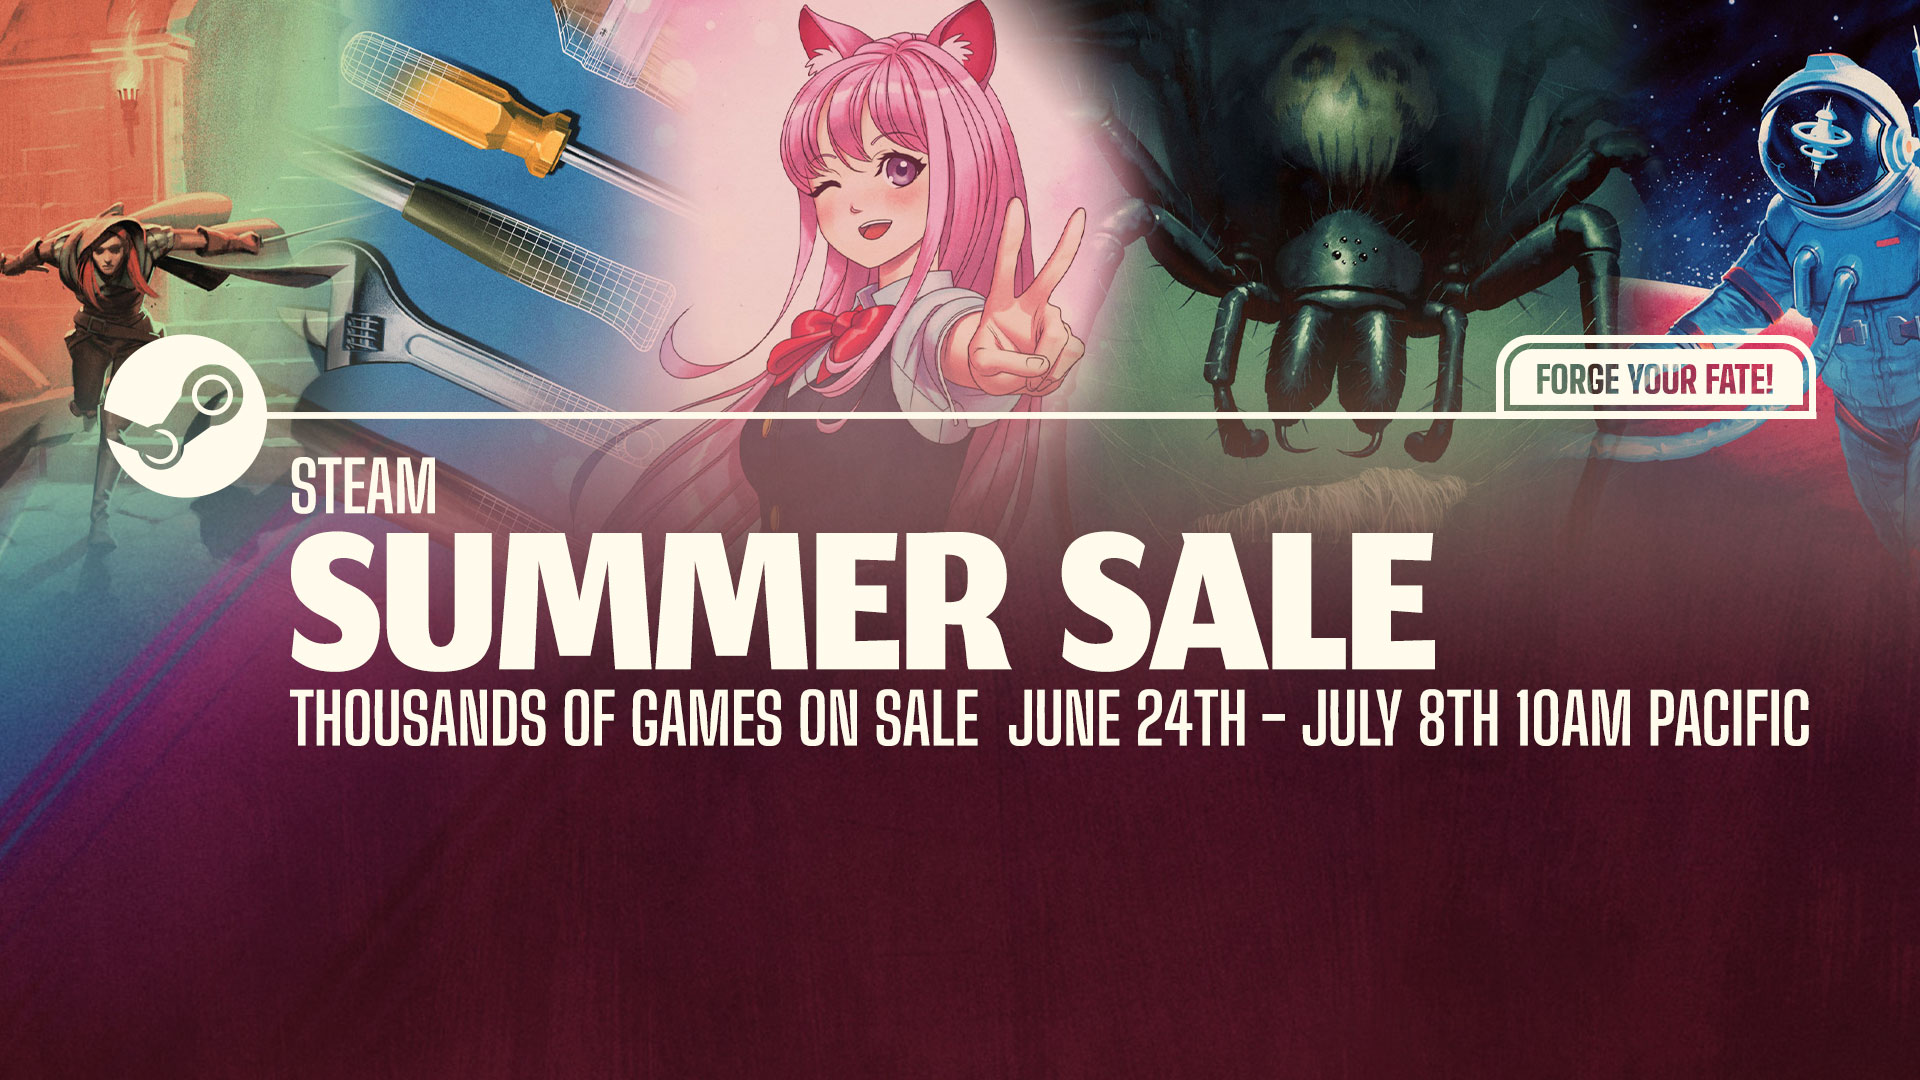 The Steam Summer Sale is now live with discounts on 1,000s of games VGC